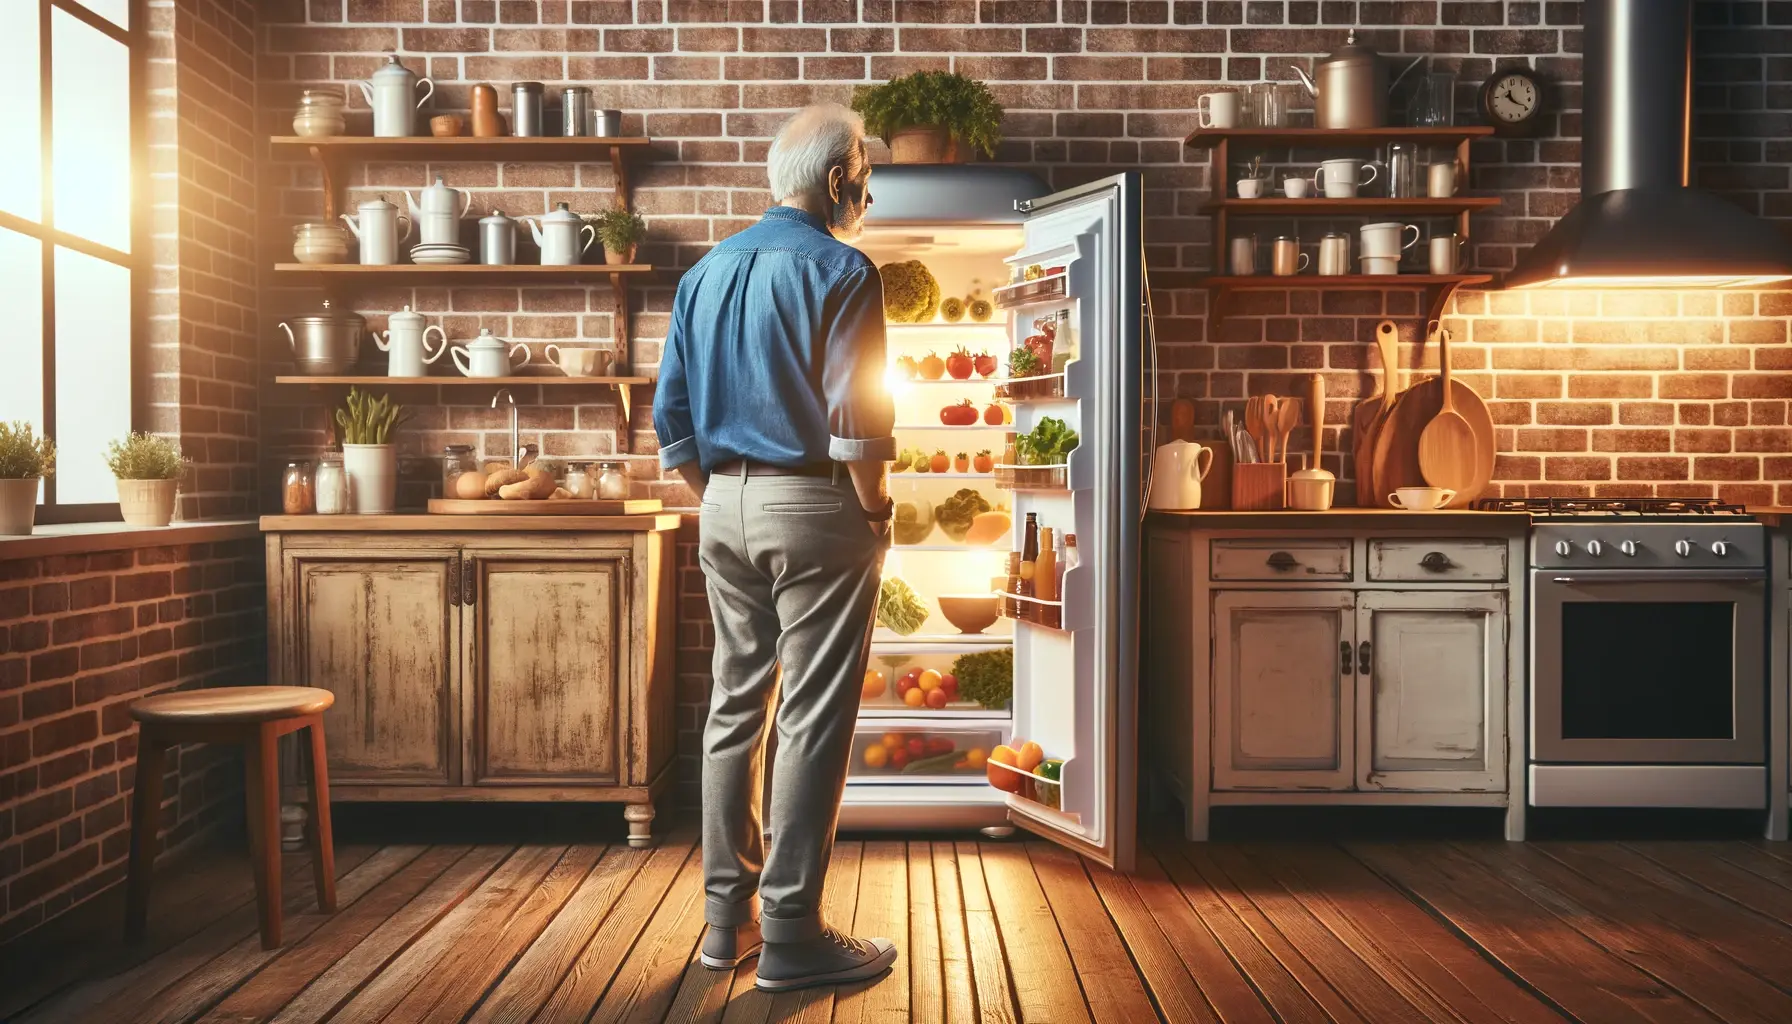 Regular Maintenance Keeps Your Refrigerator Working When You Need It